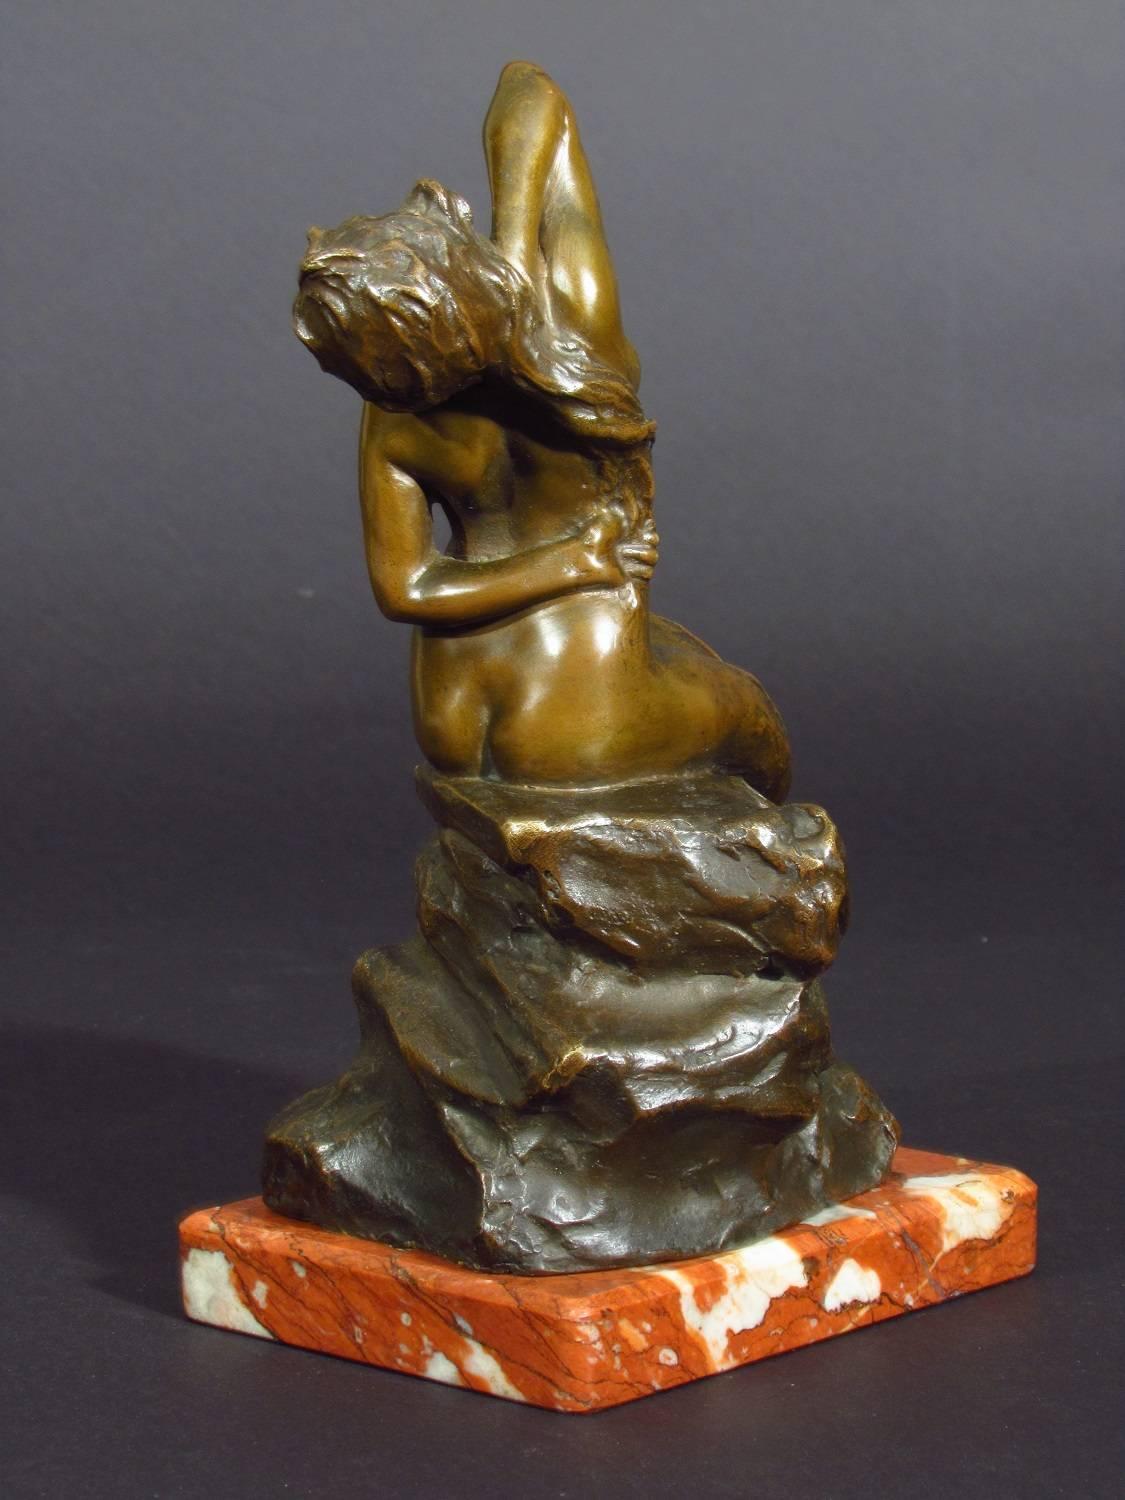 Siren by Vincenzo Bentivenga (1879-1943)

An interesting and unusual bronze sculpture of a mermaid by italian sculptor Bentivenga. Signed Bentivenga with a Art Laguna Napoli foundry inscription.